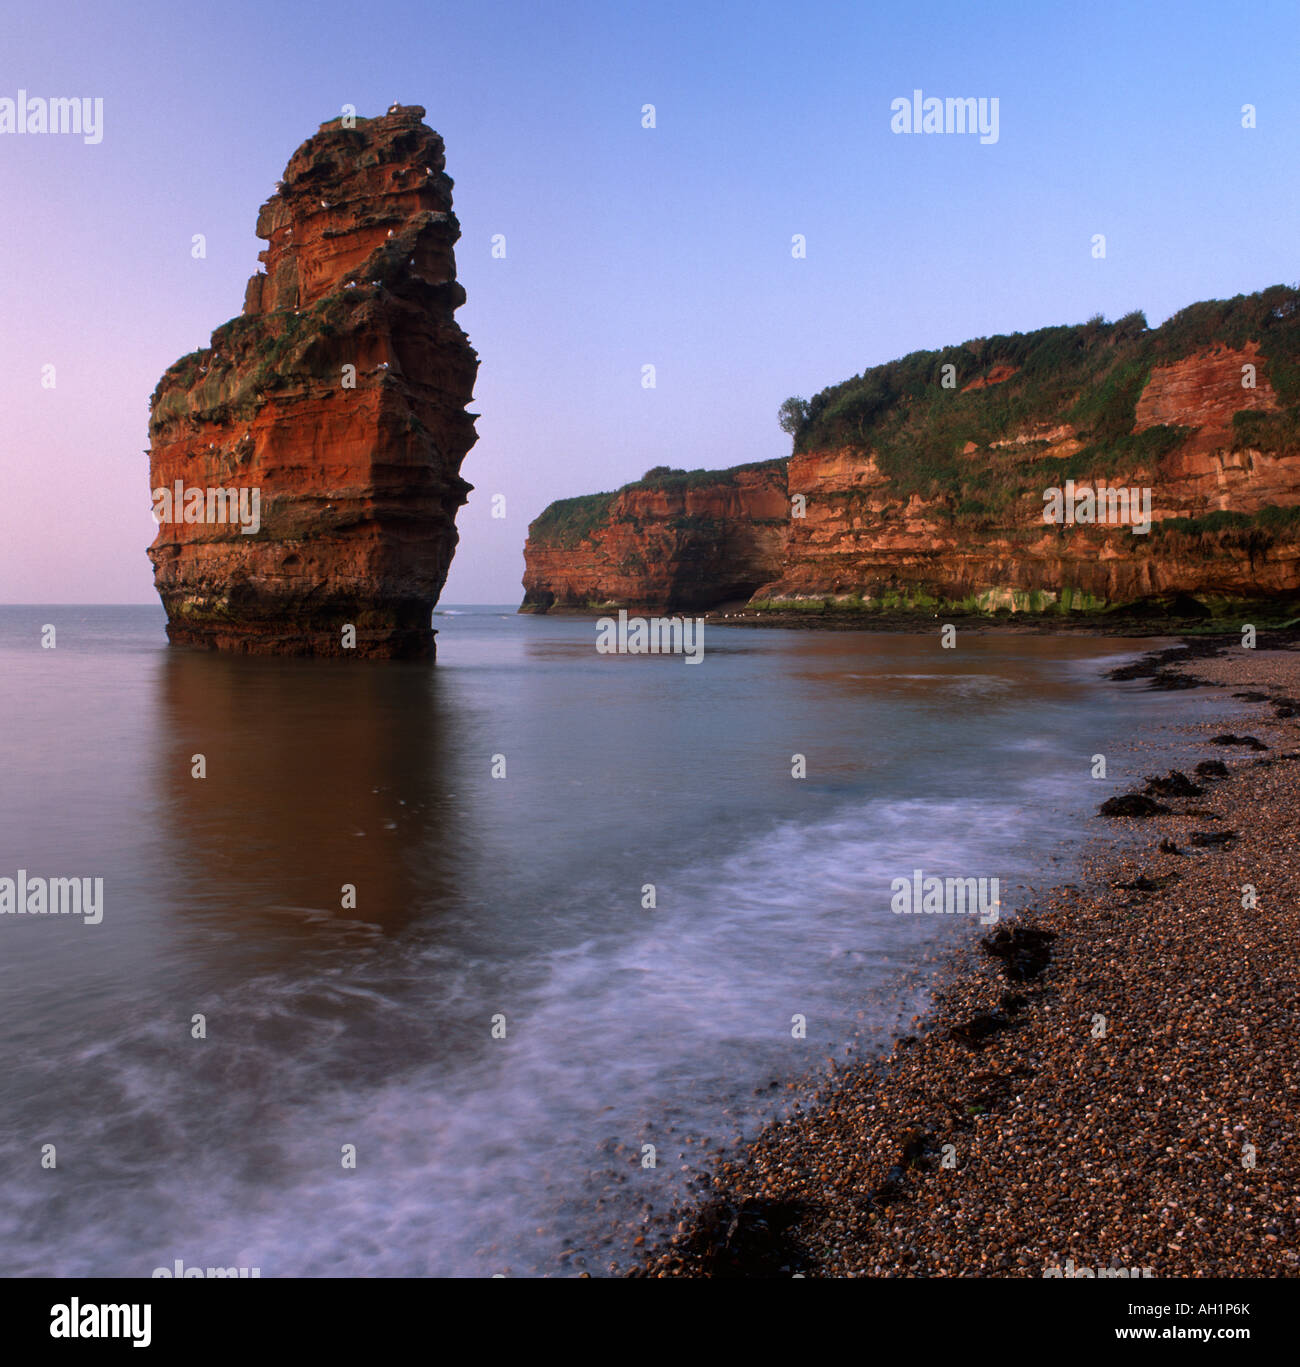 View of sea stack and cliffs at Ladram Bay, near Otterton, England, at sunrise Stock Photo